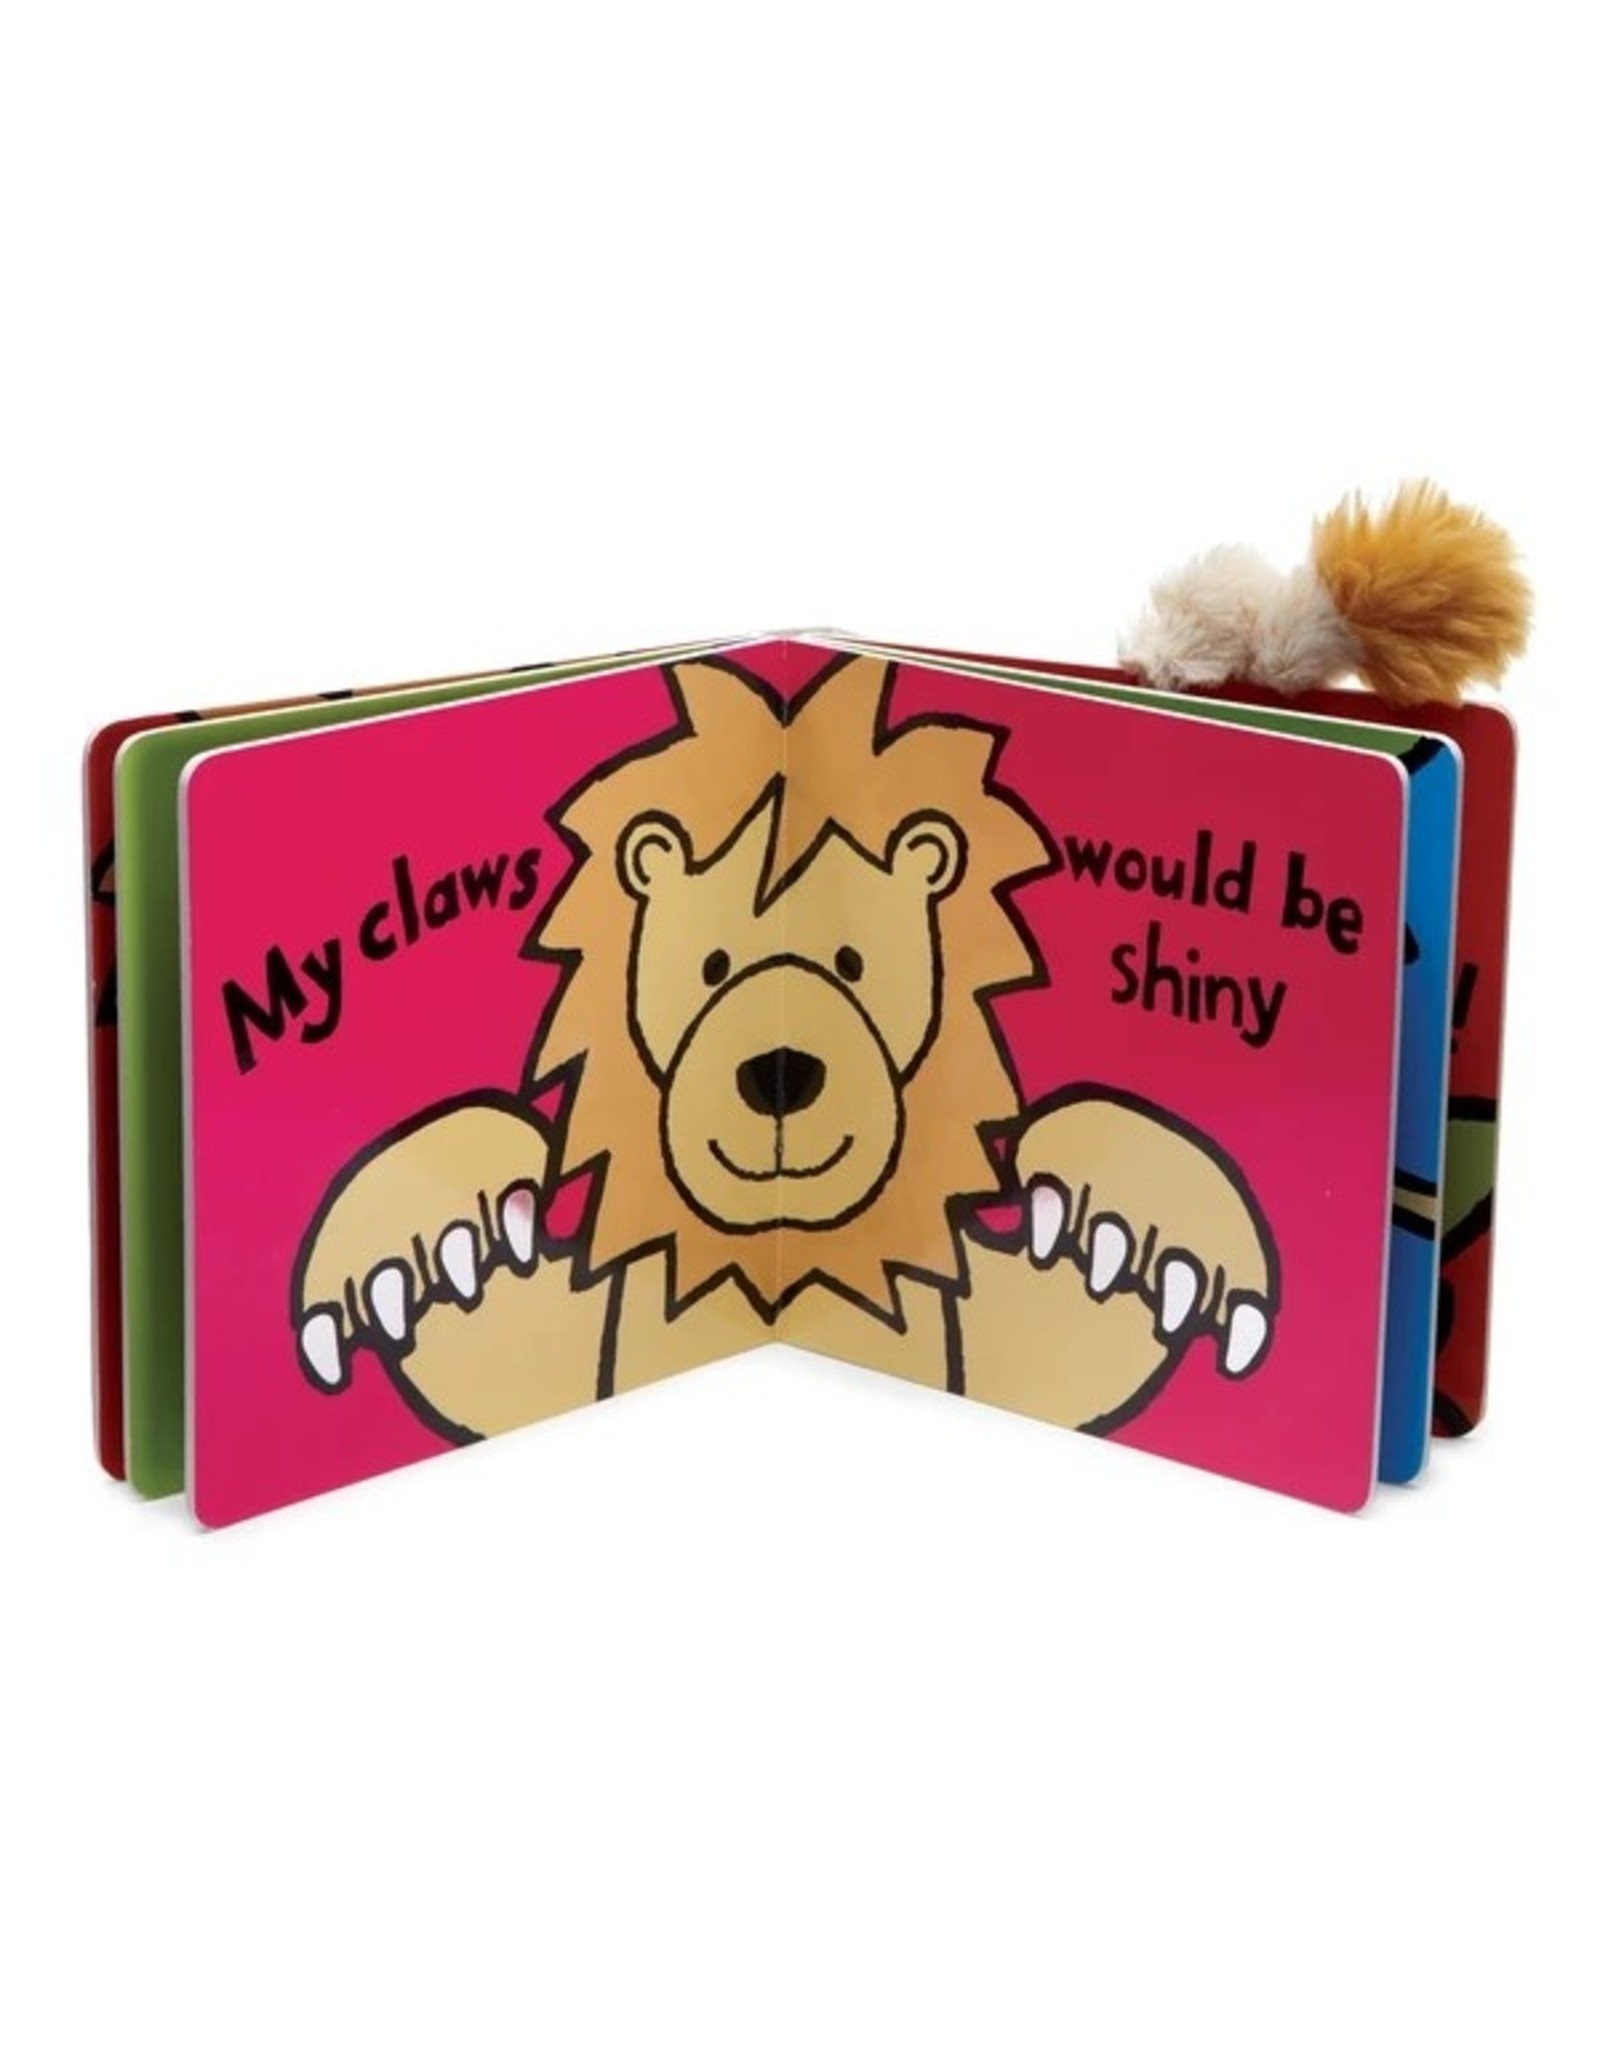 Jellycat If I Were a Lion Book